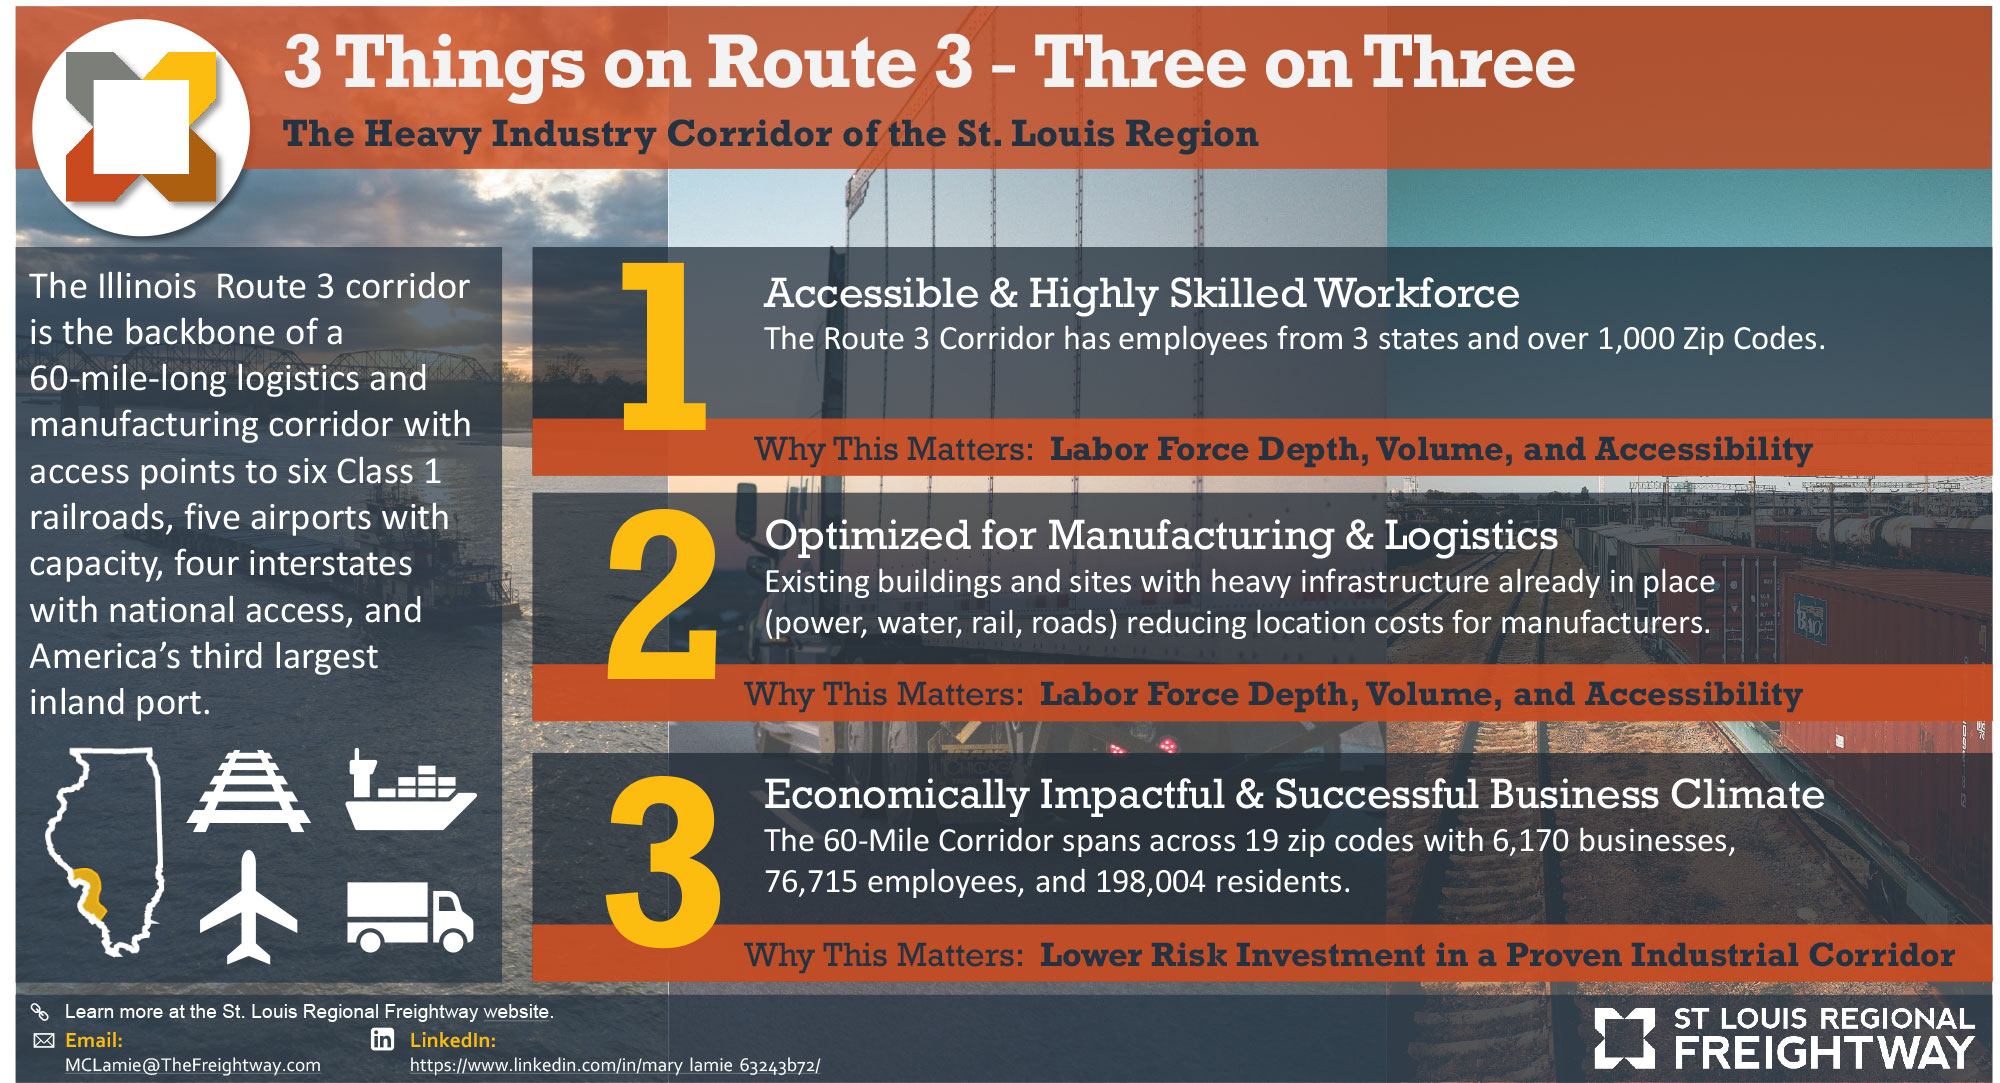 Infographic titled ‘3 Things on Route 3: The Heavy Industry Corridor of the St. Louis Region’, highlighting: 1: Accessible & Highly-Skilled Workforce; 2: Optimized for Manufacturing & Logistics; 3: Economically Impactful & Successful Business Climate